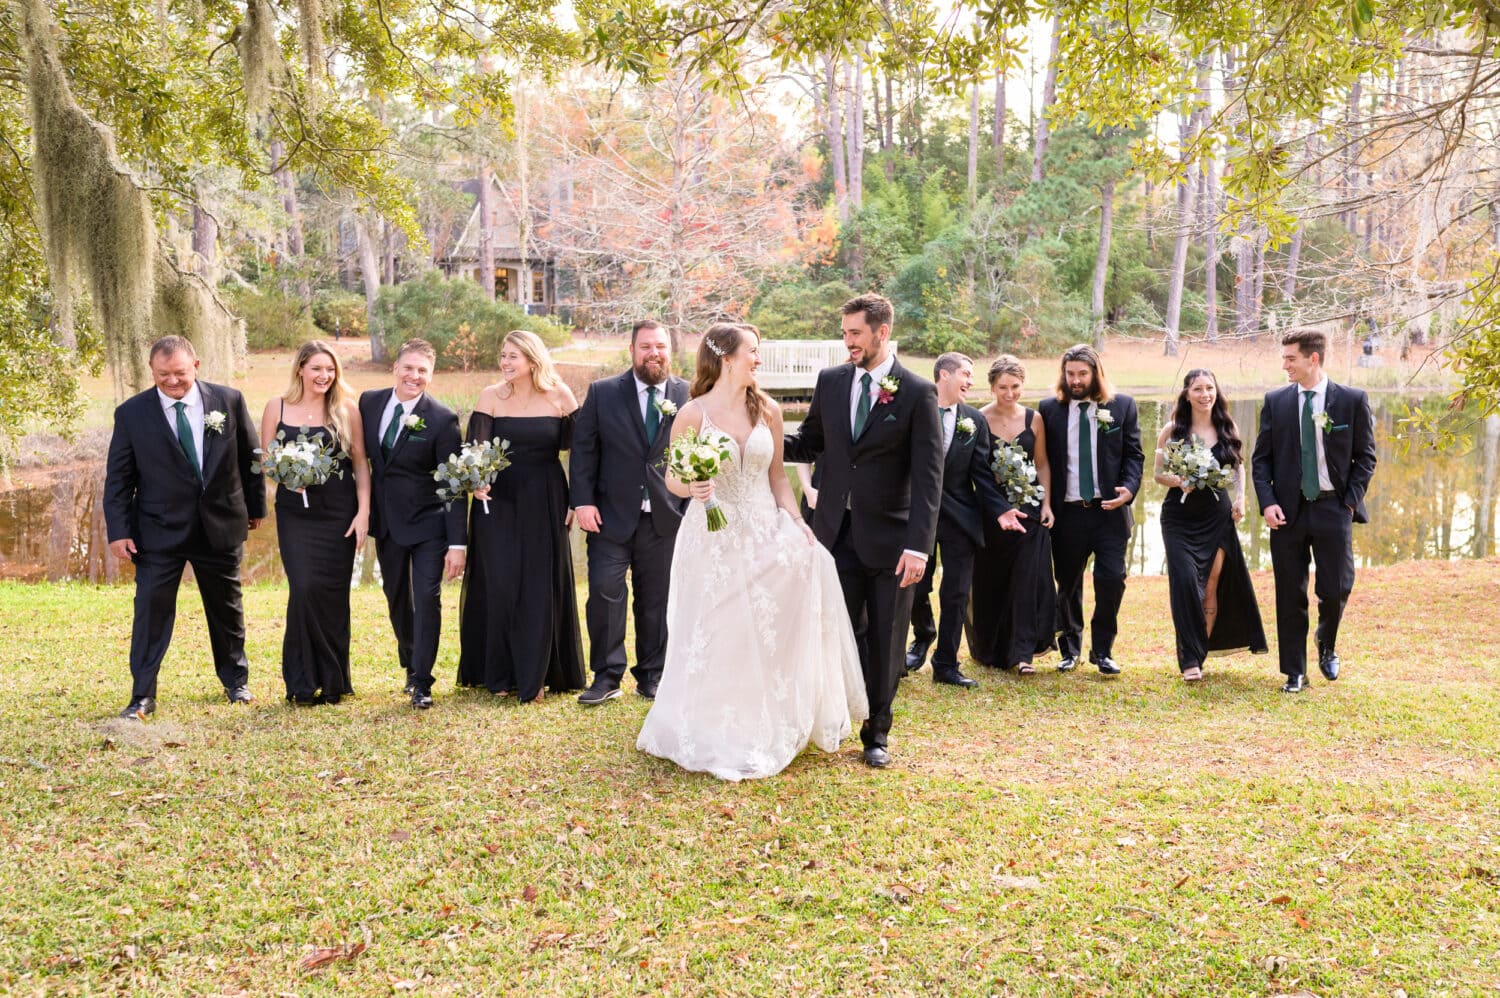 Wedding party walking together having a great time - Brookgreen Gardens